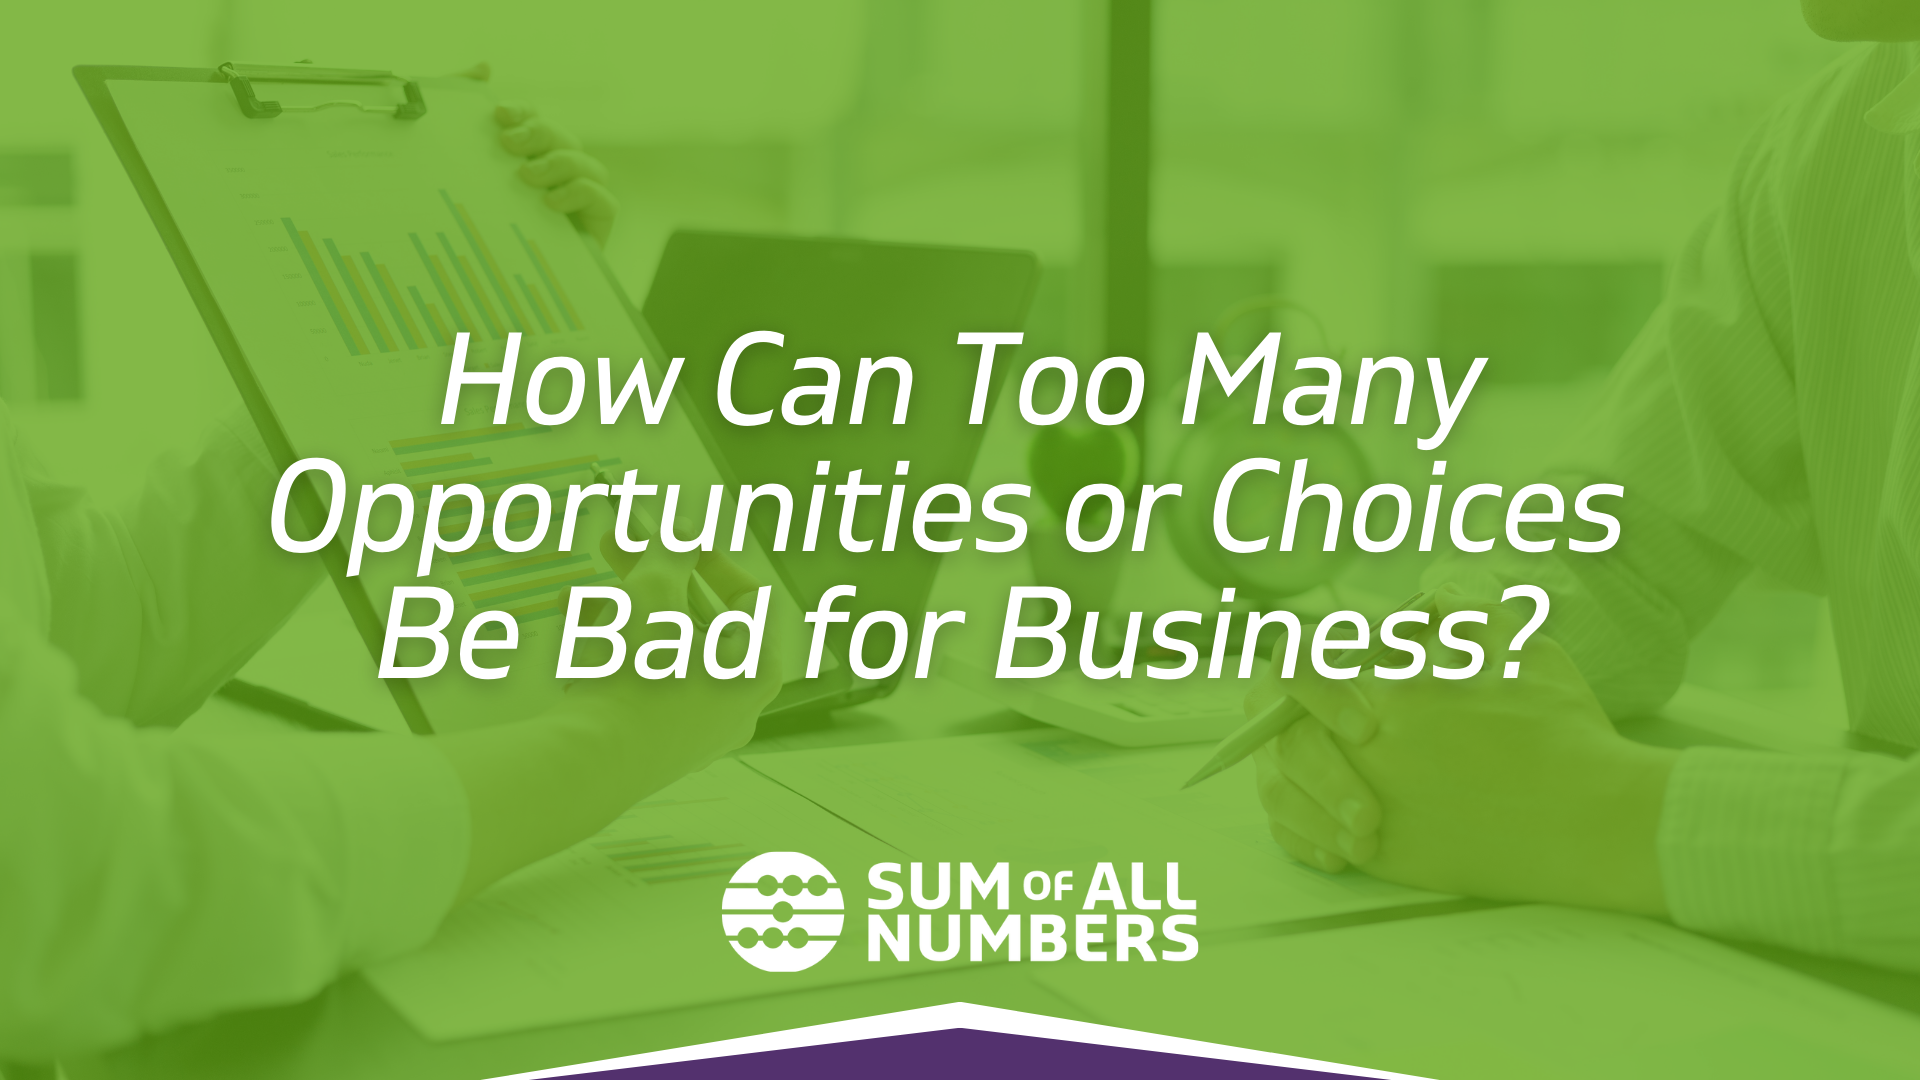 How Can Too Many Opportunities or Choices Be Bad for Business?